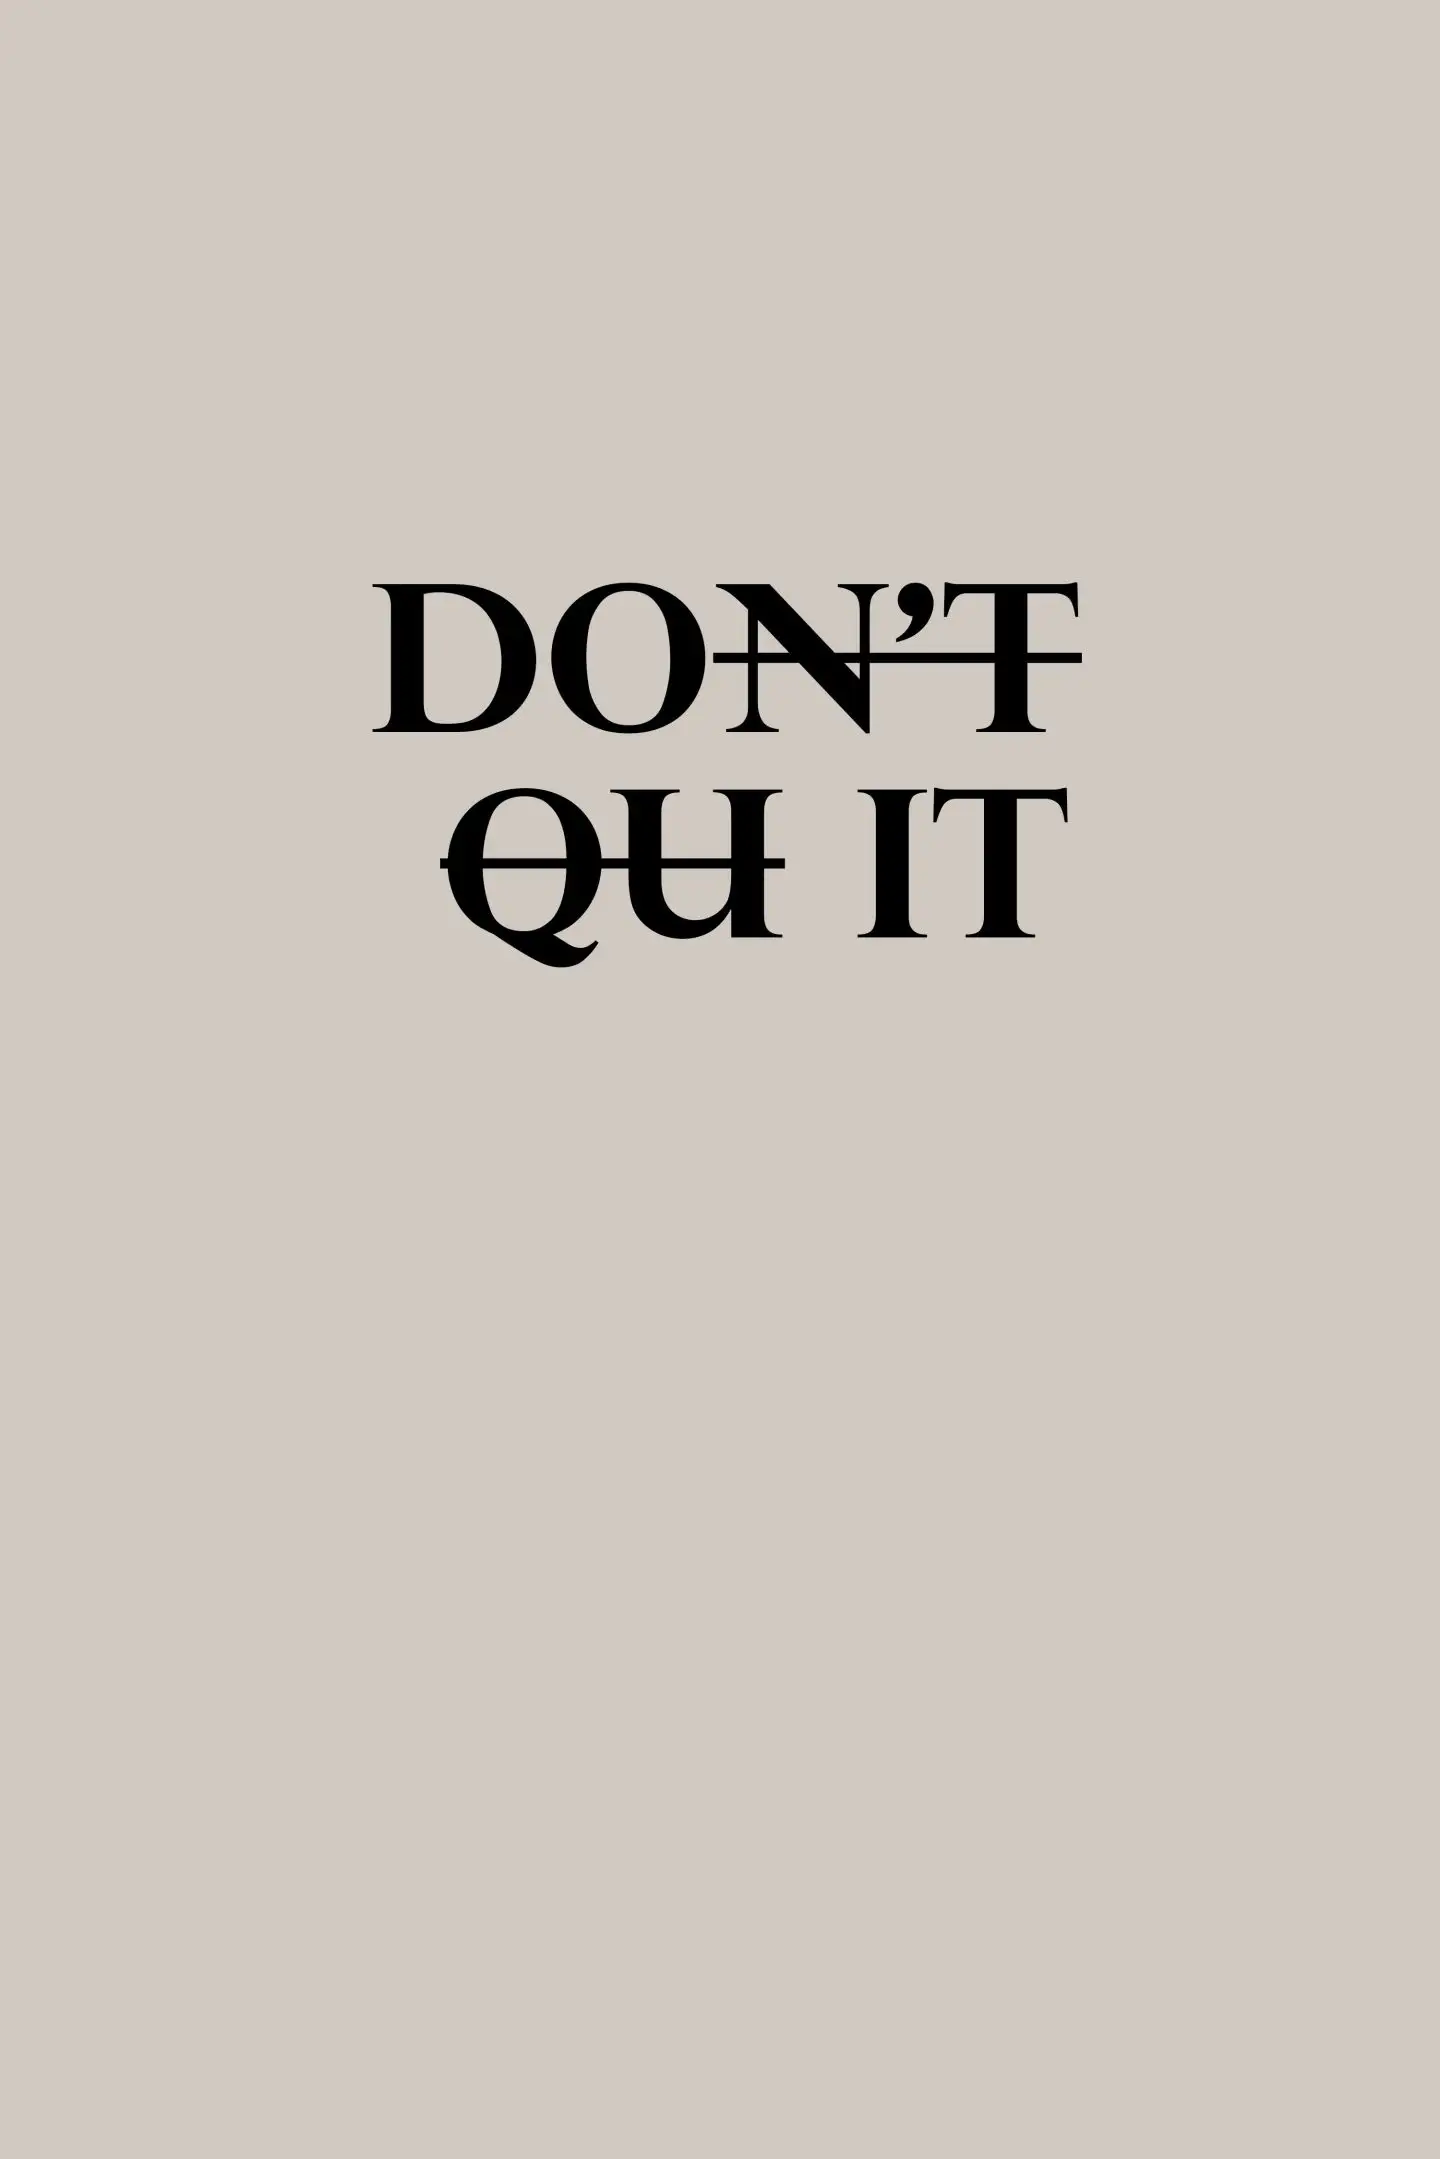 Inspirational Quotes Wallpaper iPhone Background (Free Download!)